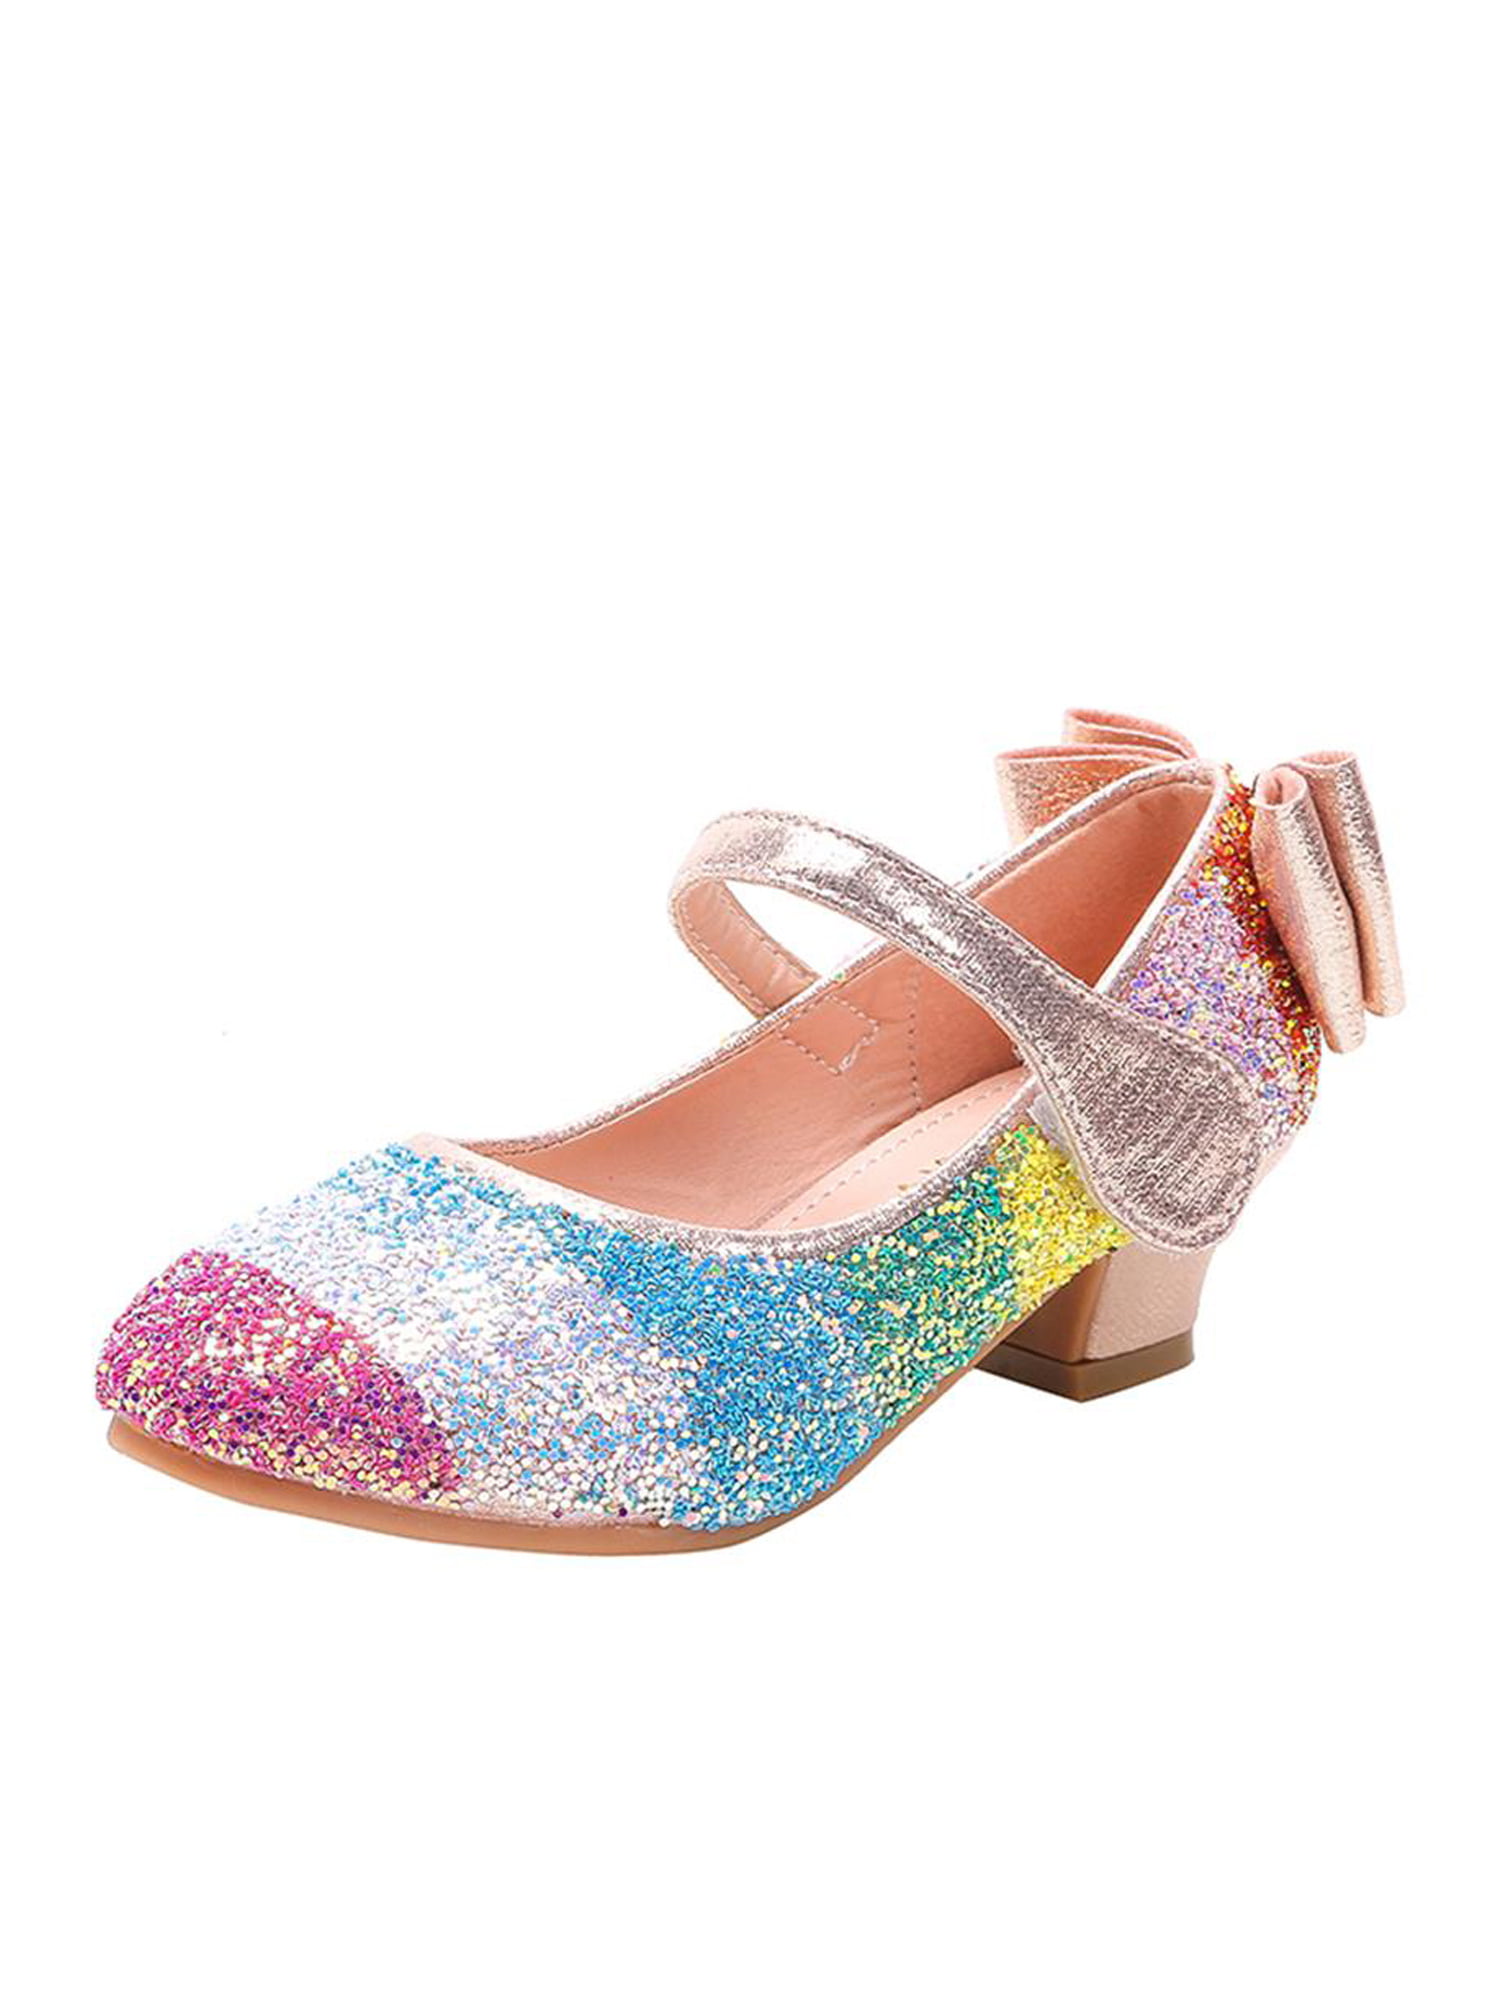 Girls Childrens Rainbow Silver Glitter Sparkly Party Mary Jane Shoes Low Heeled 